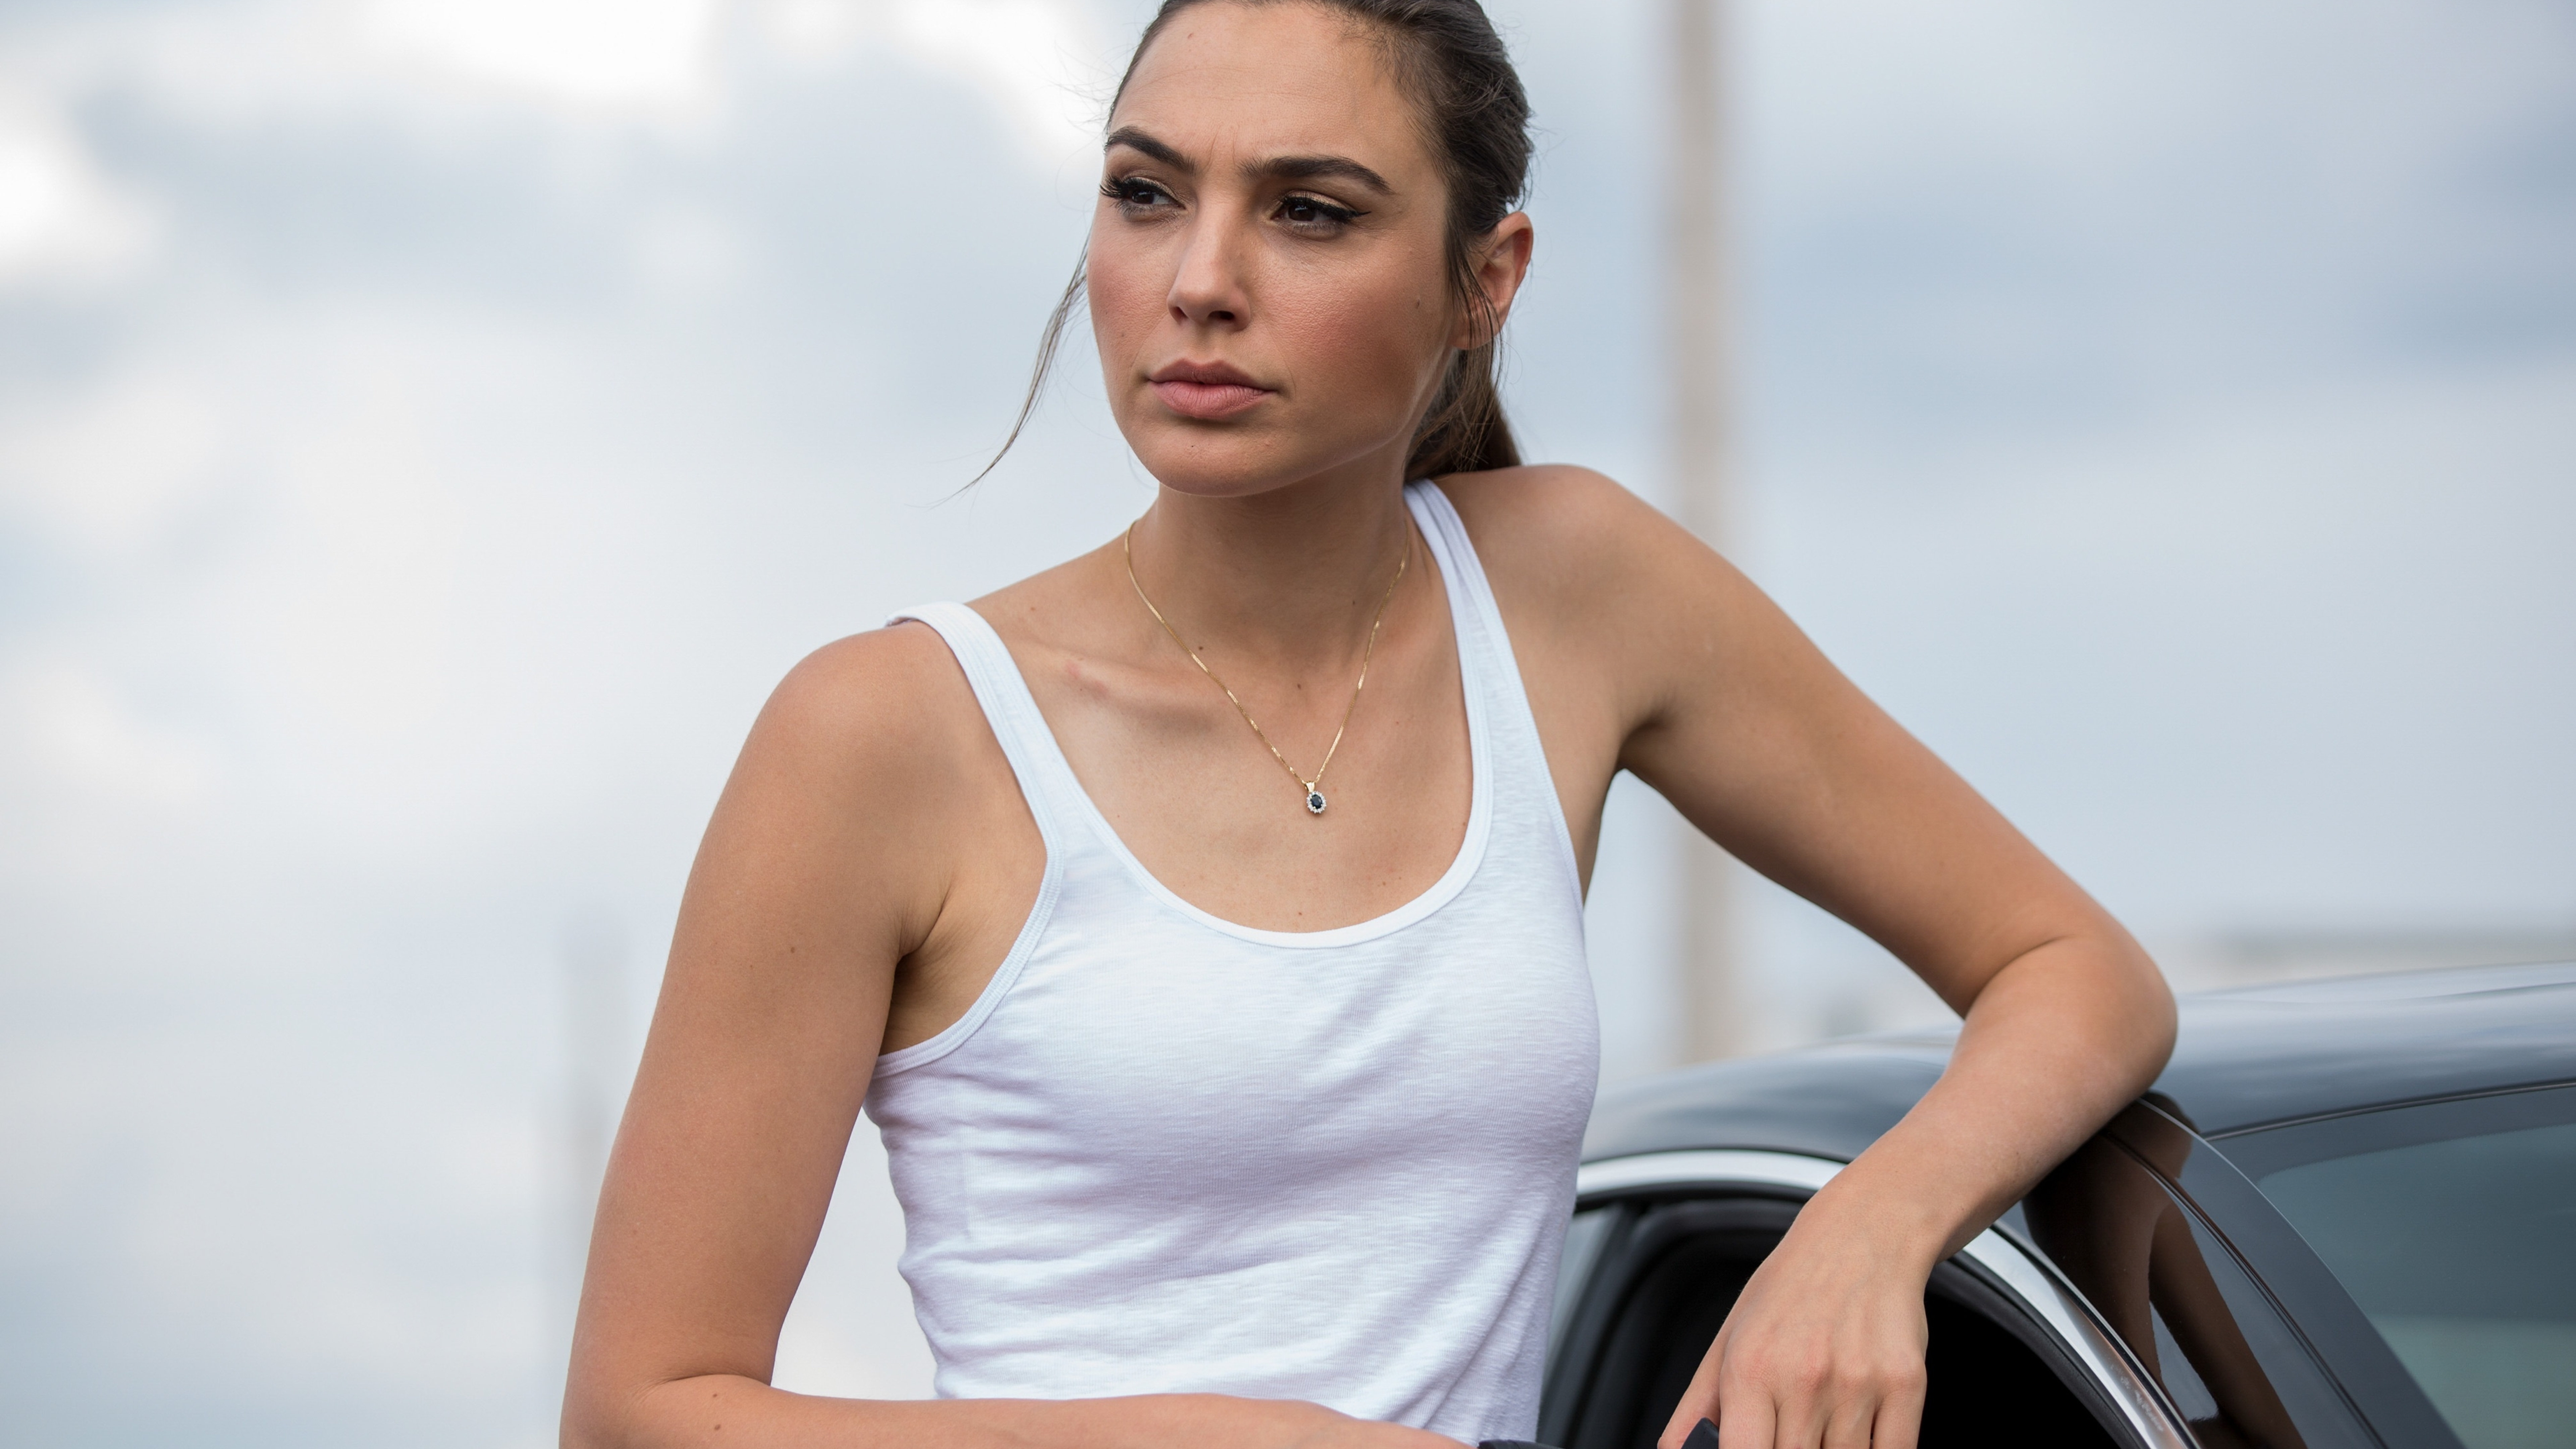 Gal Gadot In Keeping Up With The Joneses, HD 4K Wallpaper